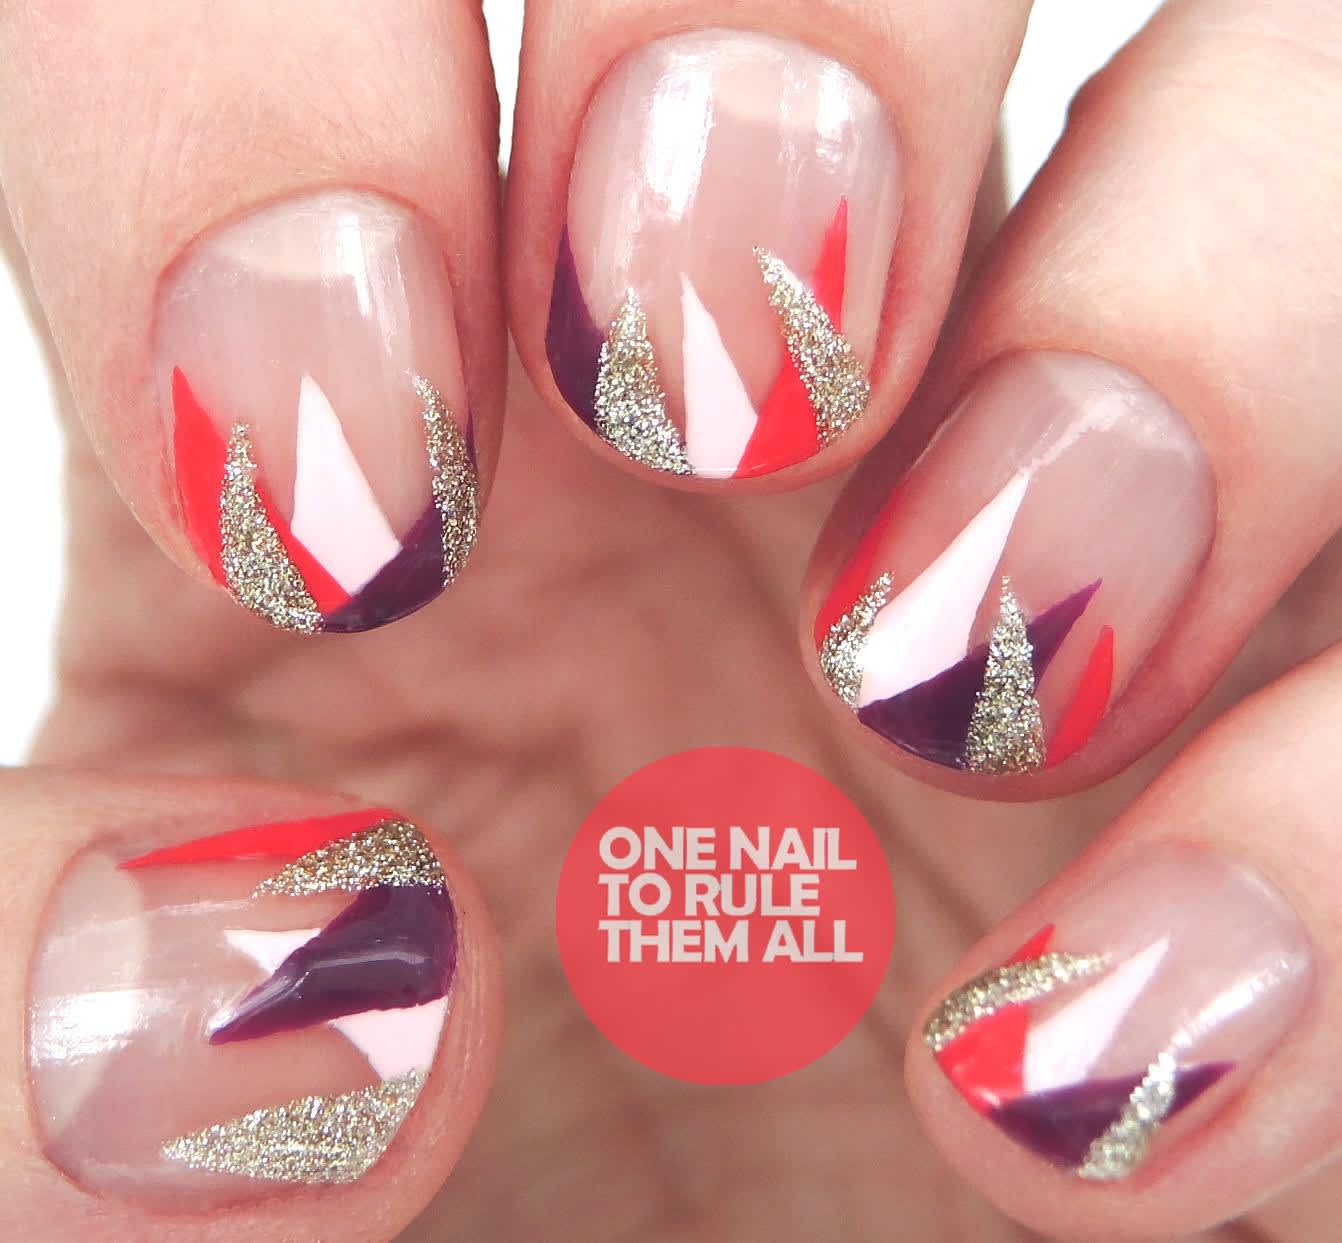 Clear nails featuring triangles of different colors, including gold glitter, white, berry & red